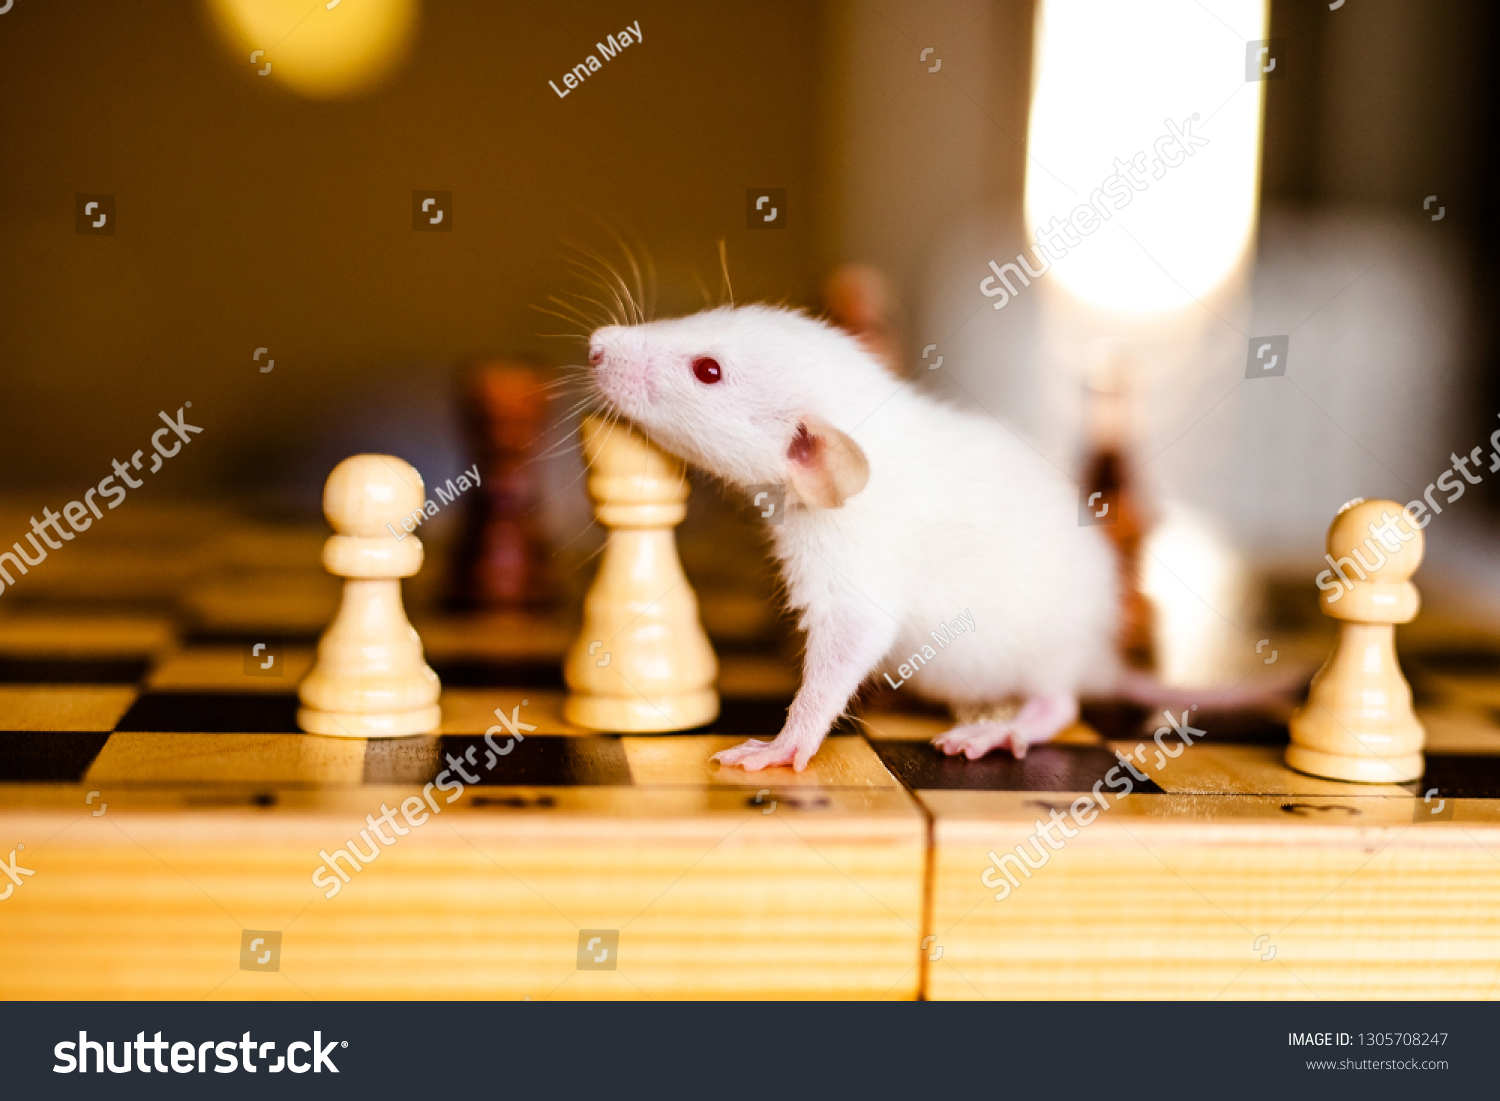 Cute little white rat with big ears siting on the chess board on the warm yellow background. #1305708247